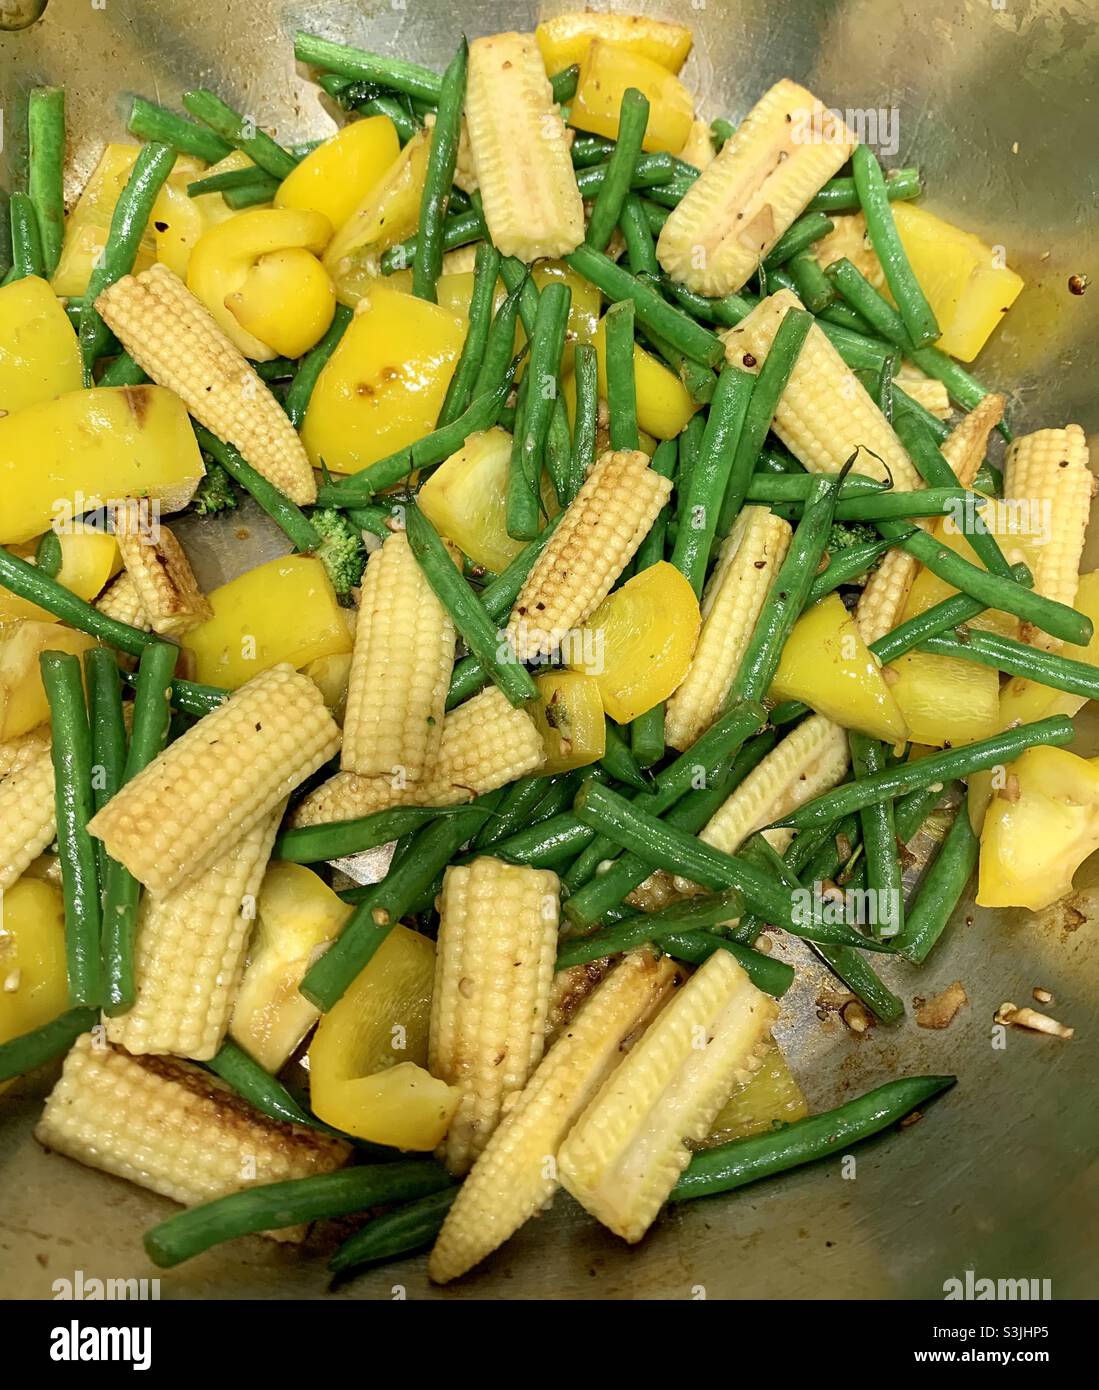 Baby corn yellow peppers and green beans frying in a wok Stock Photo